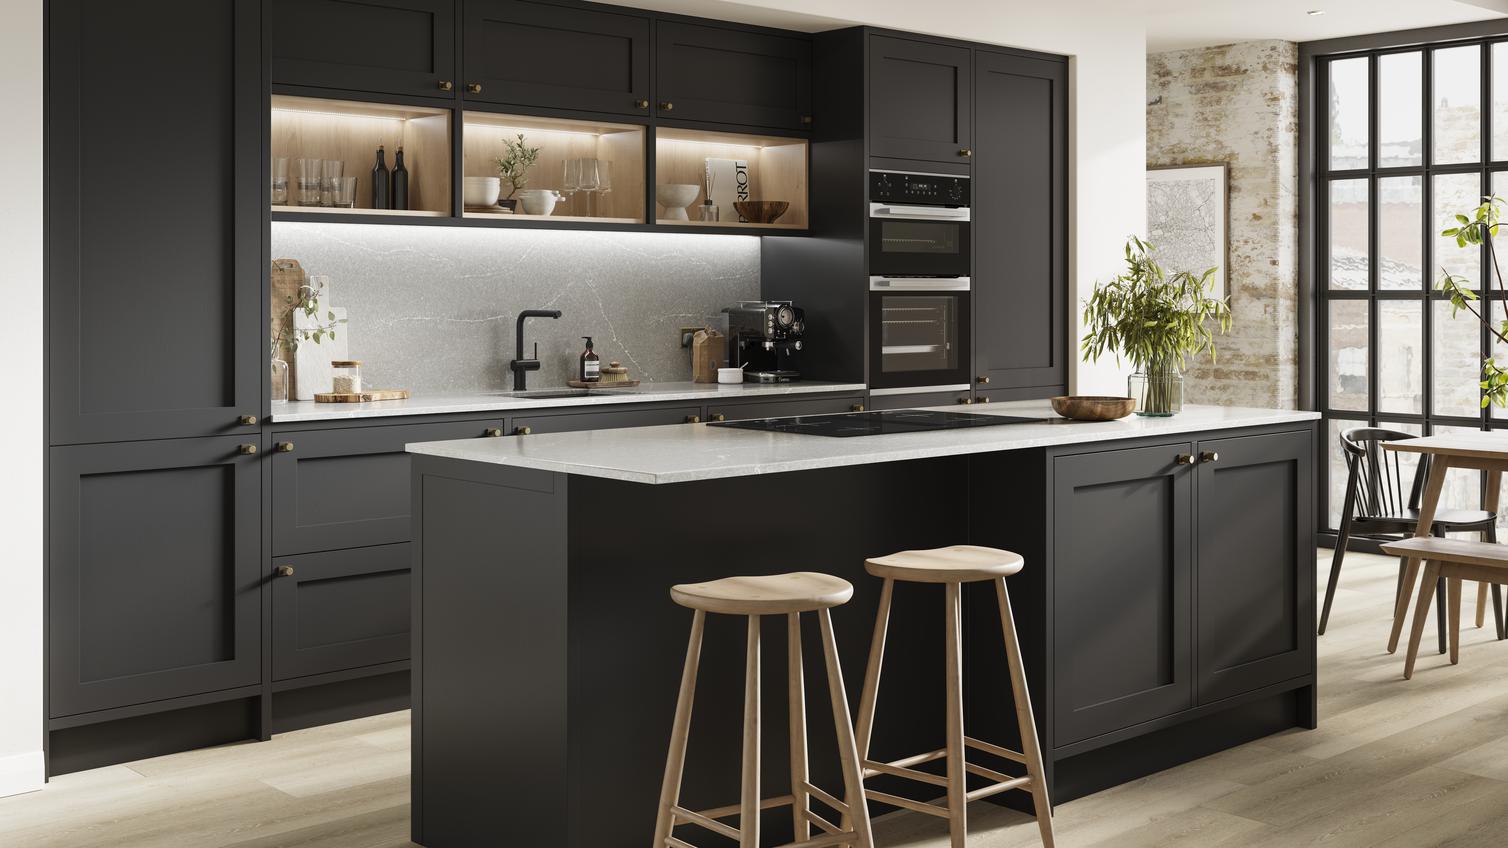 Black matt kitchen with an island layout and in-frame cabinets. Includes white worktops and black tap for a two-tone design.